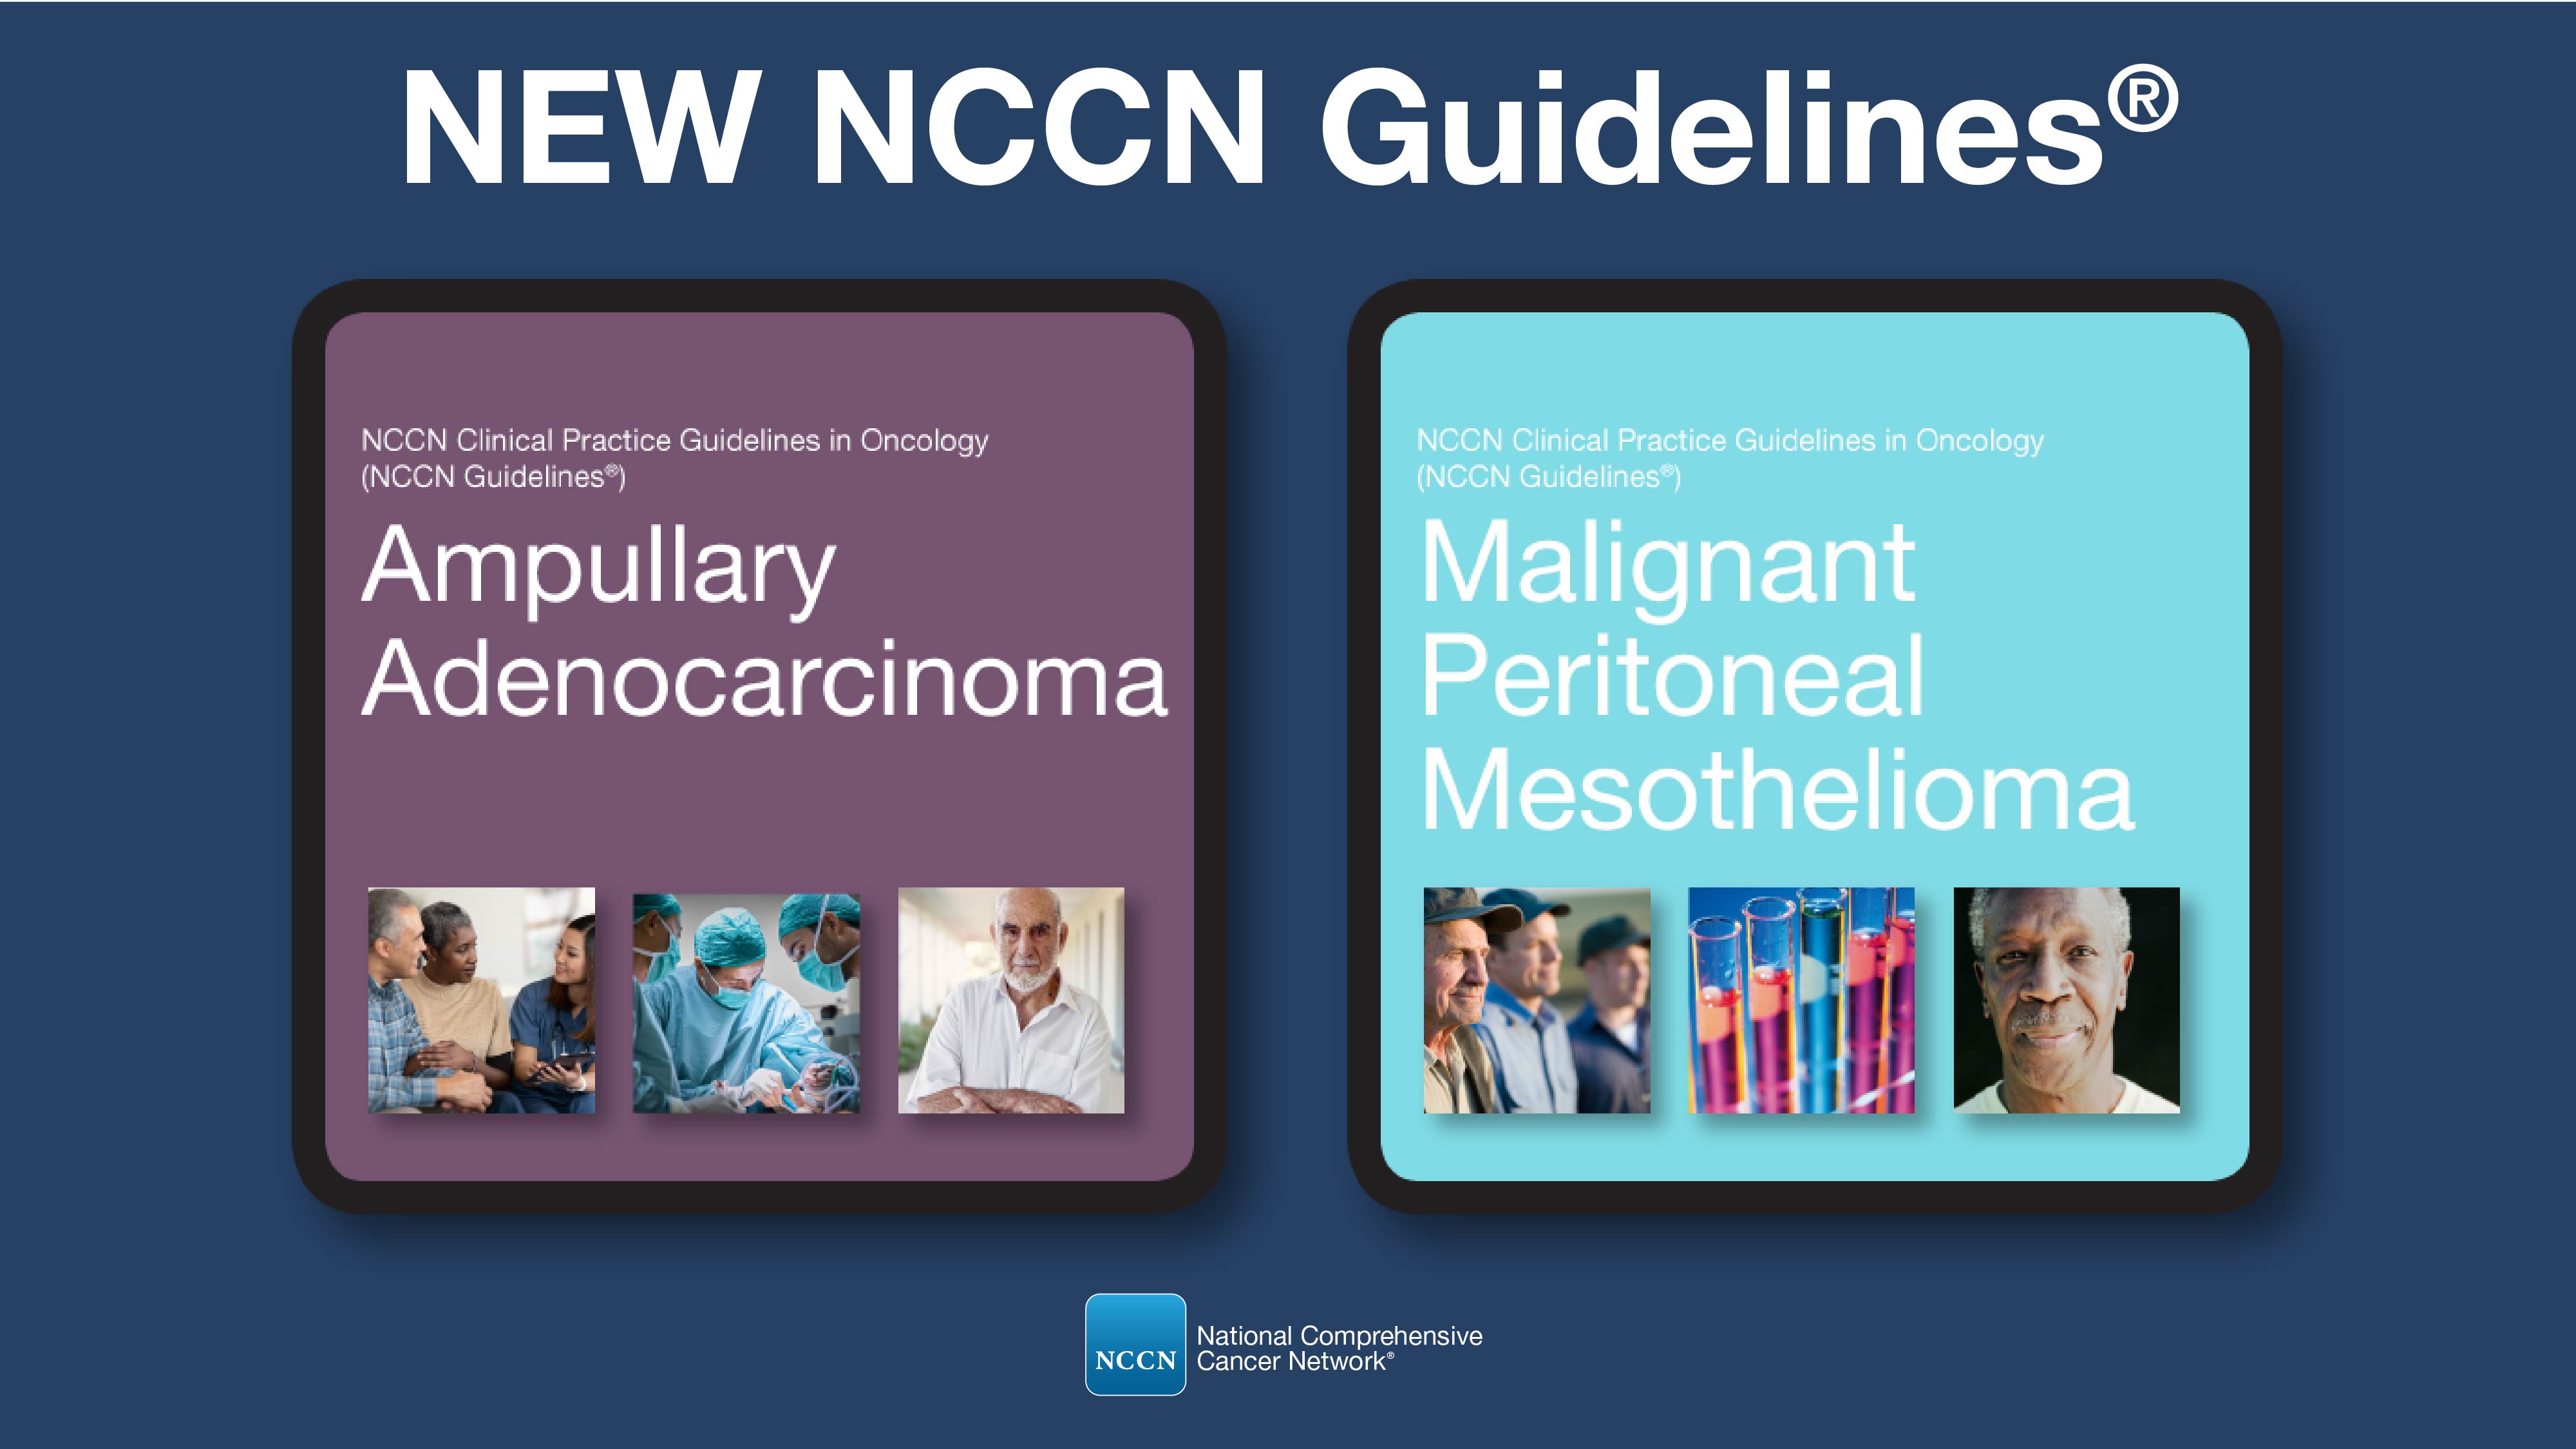 New NCCN Guidelines for Malignant Peritoneal Mesothelioma and for Ampullary Adenocarcinoma now available.